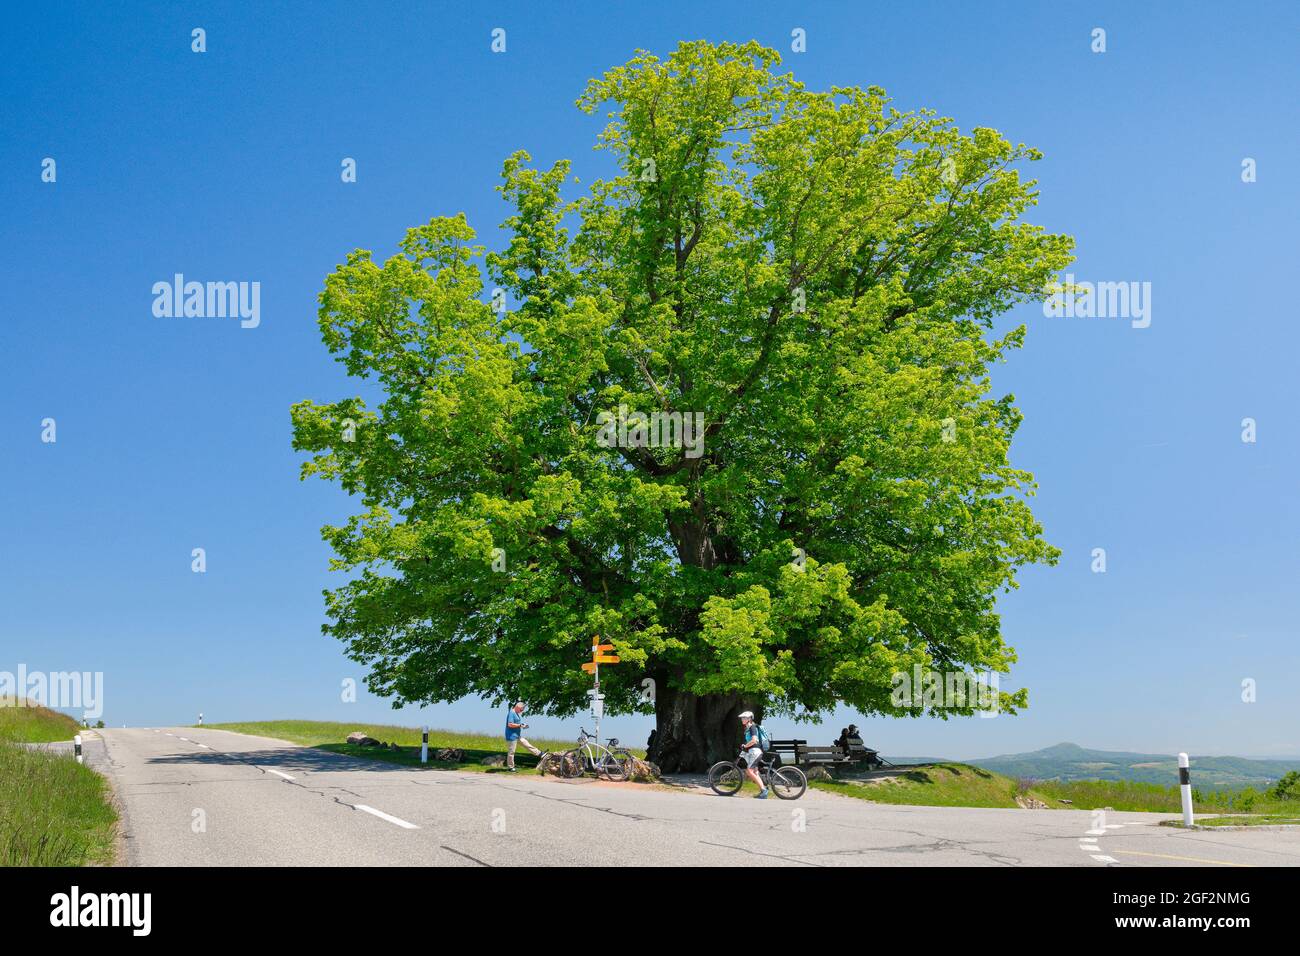 large-leaved lime, lime tree (Tilia platyphyllos), Linden tree of Linn, large ancient linden tree standing at the intersection under a blue sky, Stock Photo